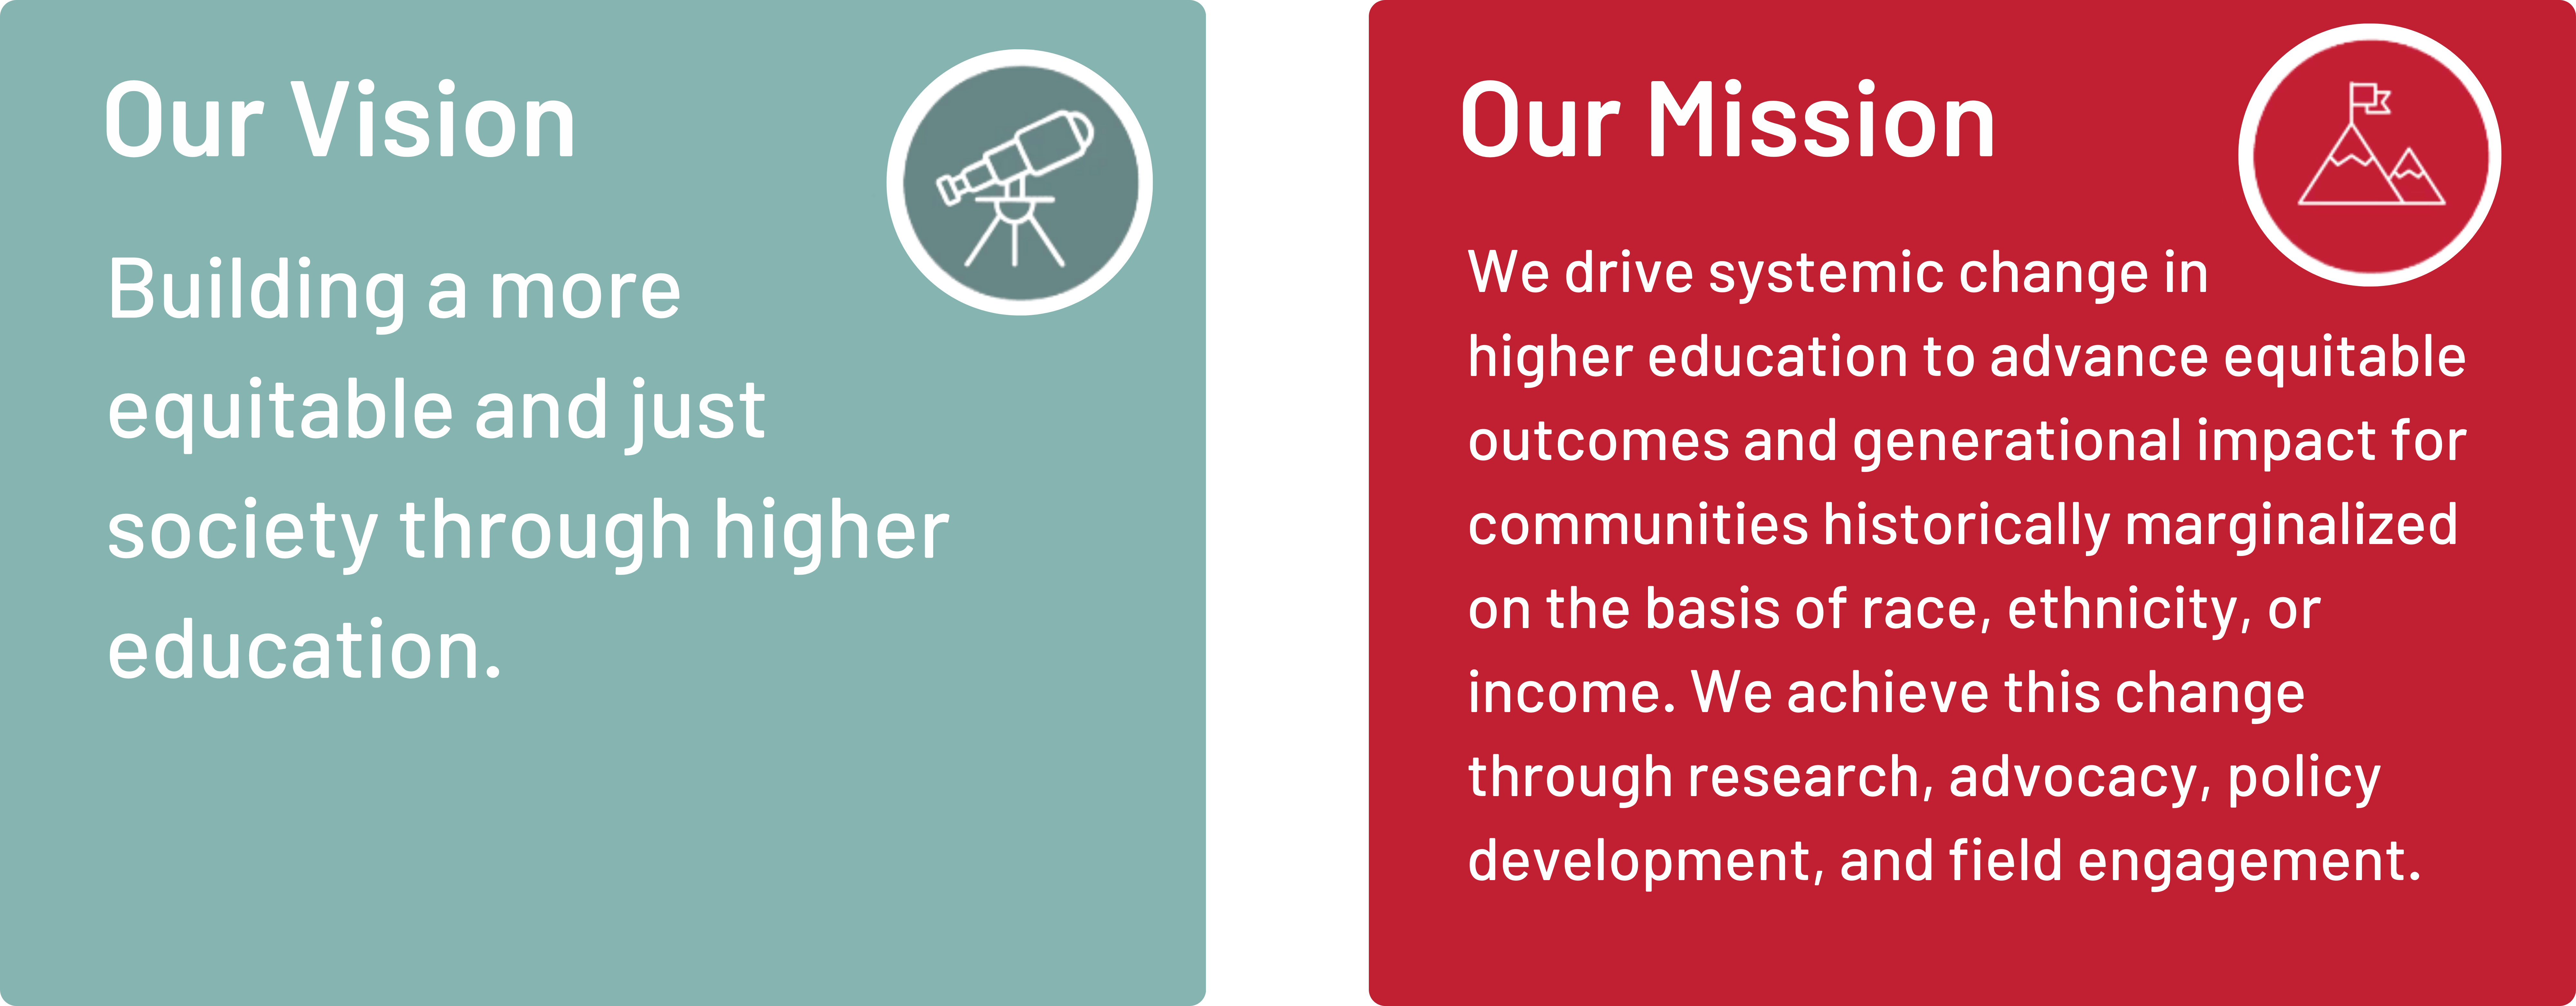 Our Vision: Building a more just and equitable society through higher education
Our Mission: We drive systemic change in higher education to advance equitable outcomes and generational impact for communities historically marginalized on the basis of race, ethnicity, or income. We achieve this change through research, advocacy, policy development, and field engagement.